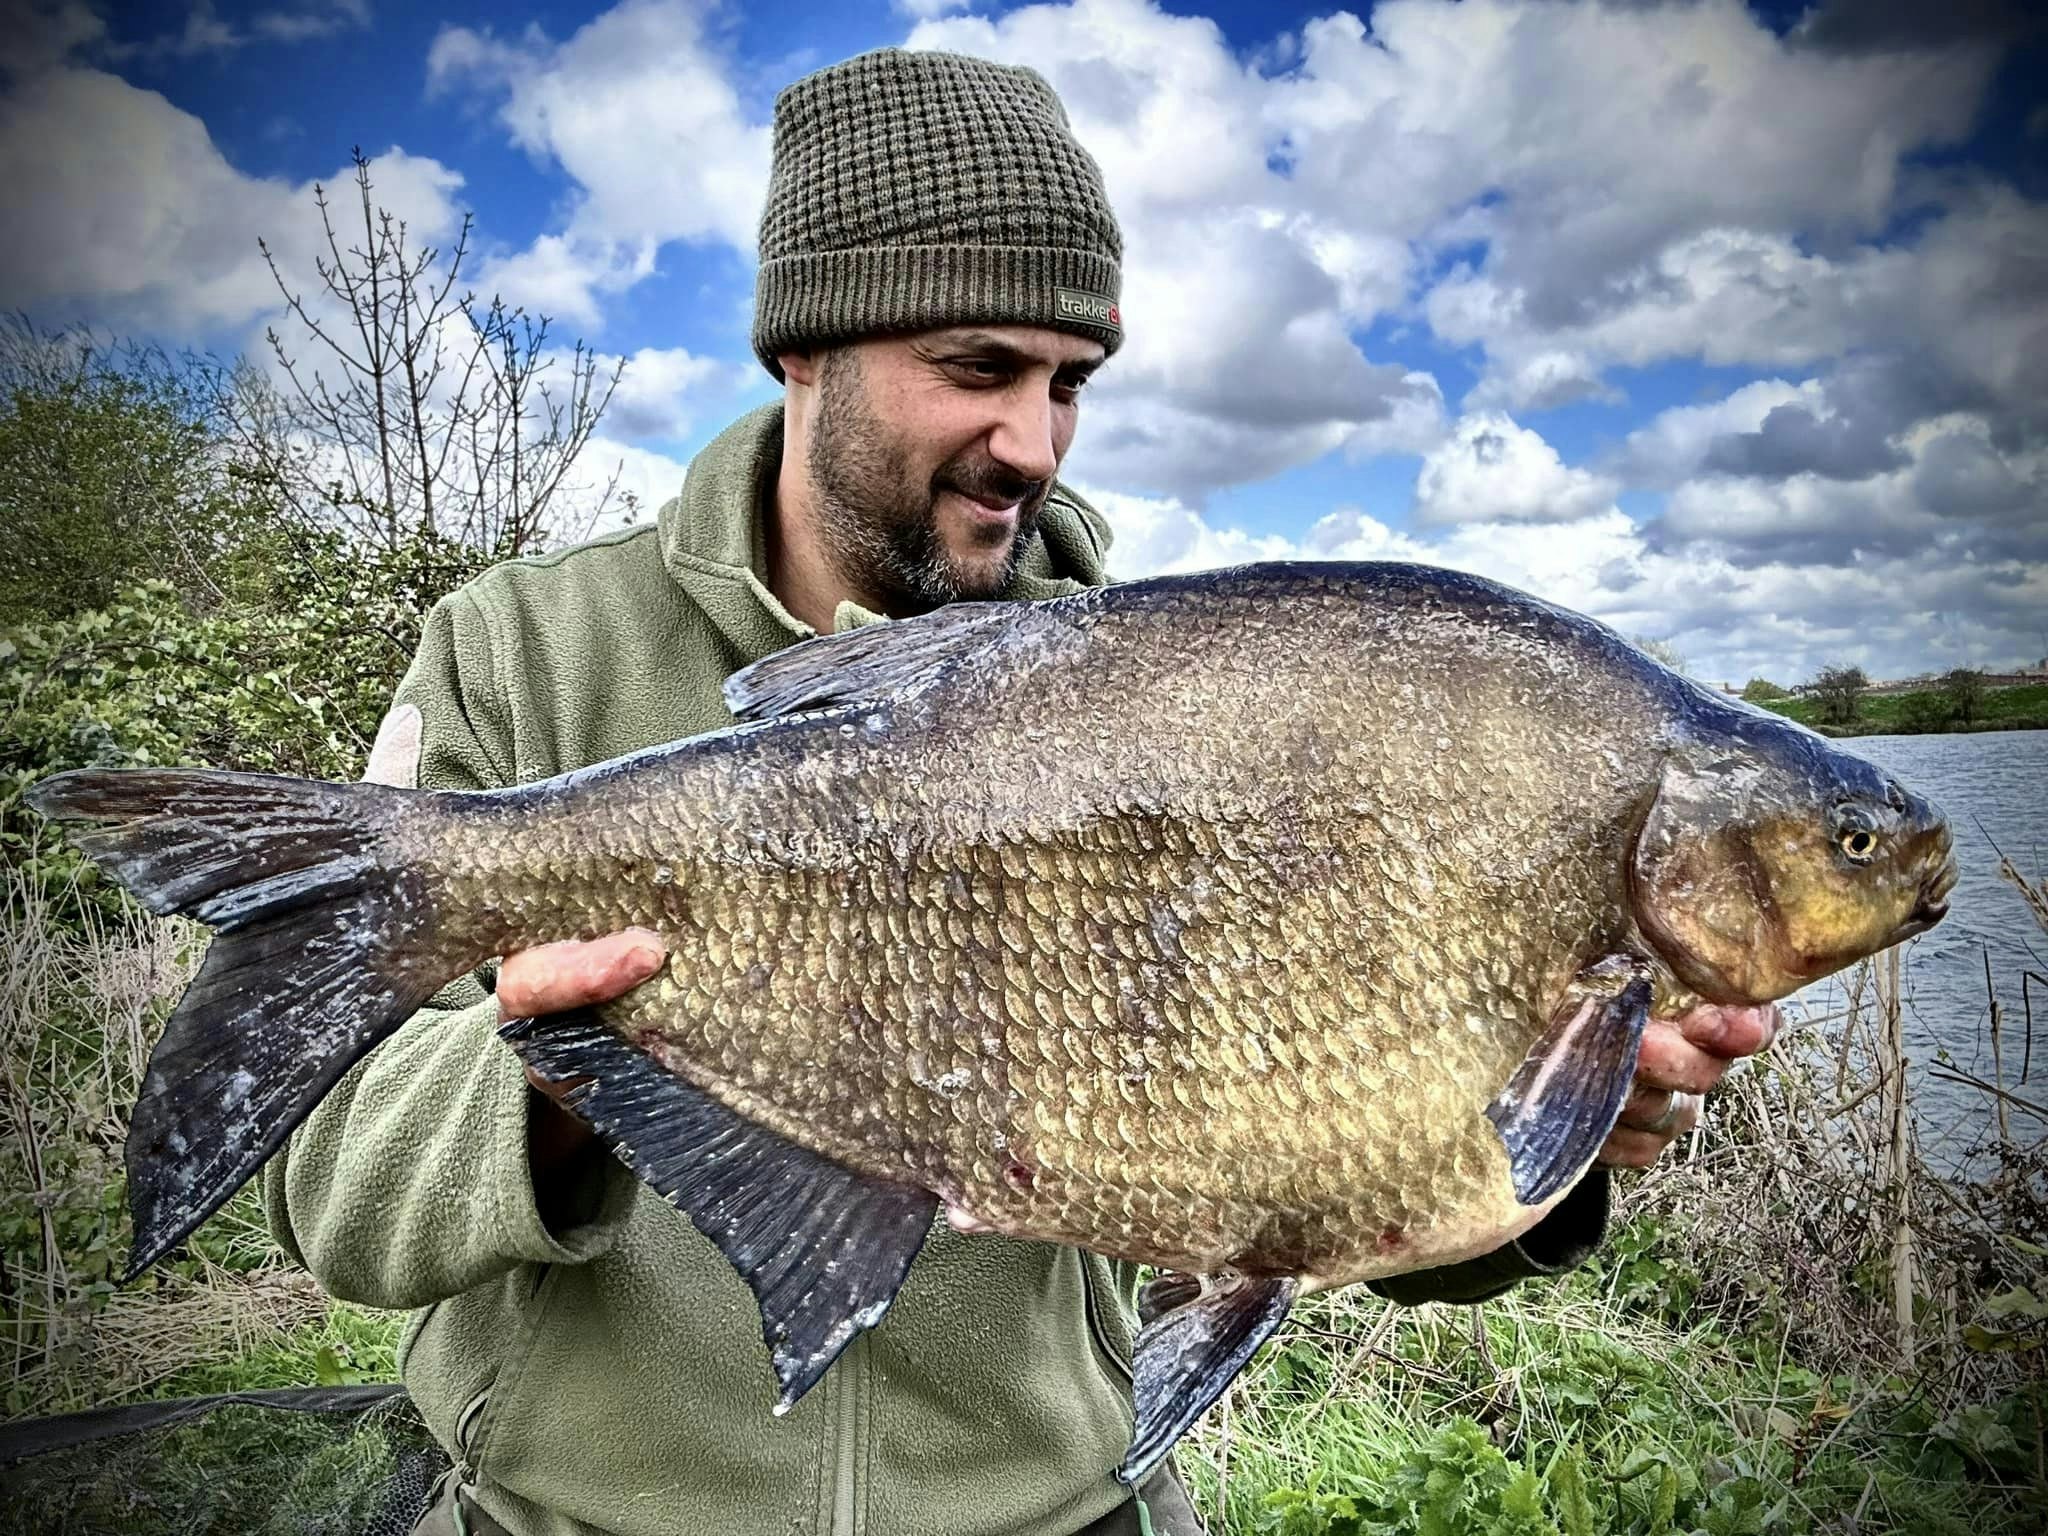 Daniel Bouskila with one of his 14 double figure bream.